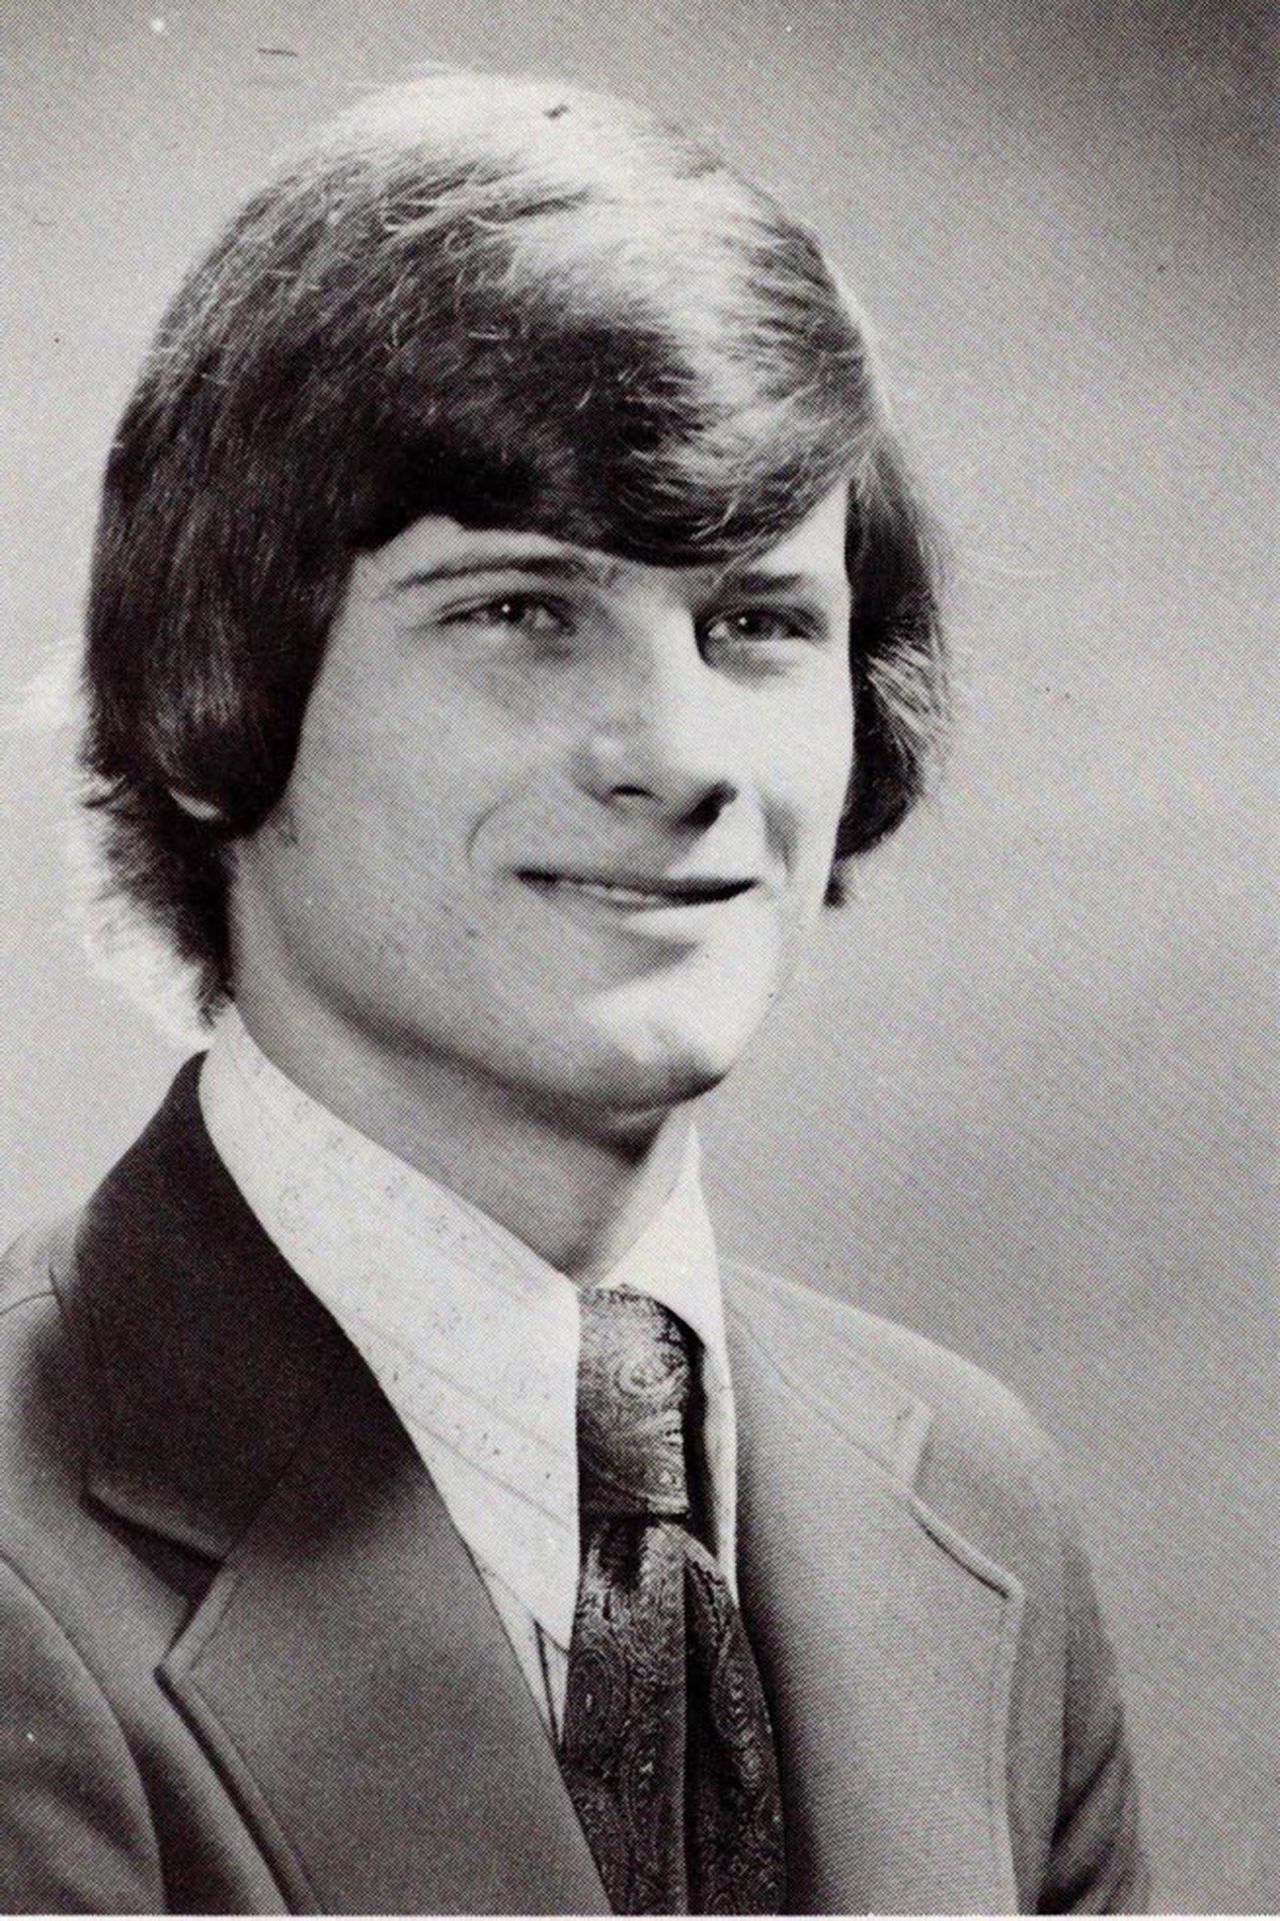 Roberts is seen in a yearbook photo from his prep school in La Porte, Indiana. He was born in Buffalo but grew up in northwest Indiana. In 1979, he graduated from Harvard Law School.